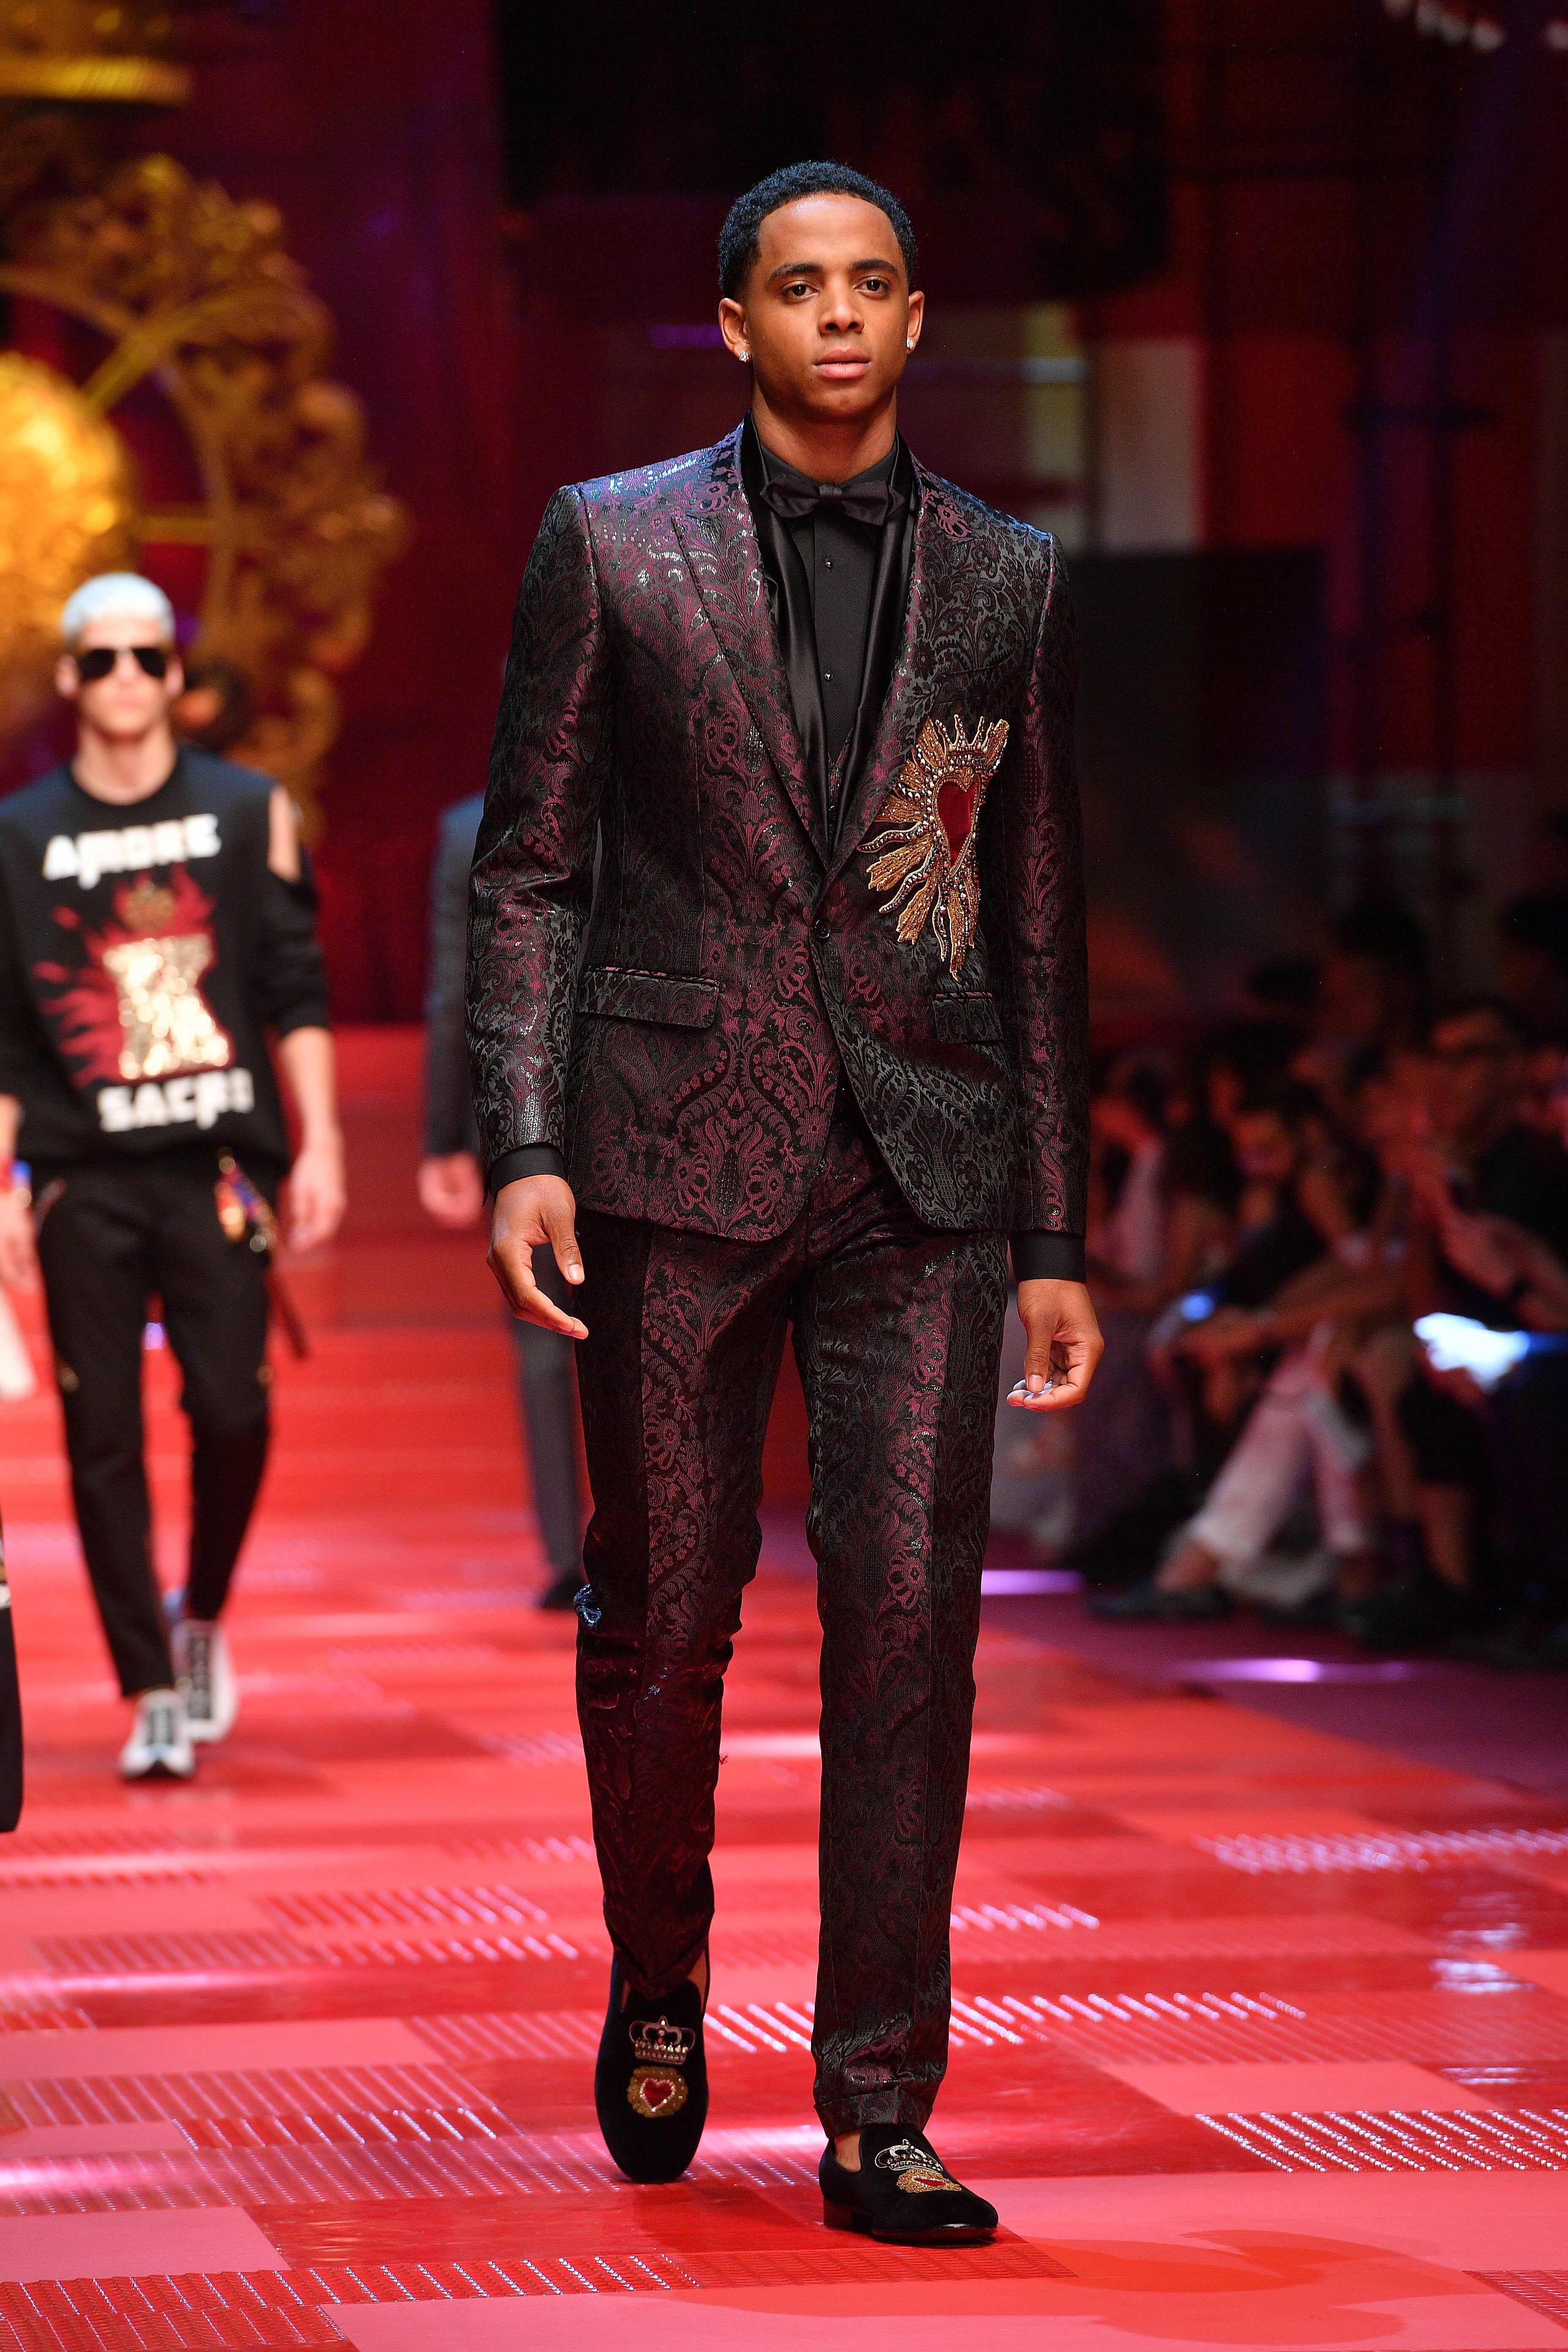 Christian Combs, Cordell Broadus & Diggy Simmons Walk in Dolce & Gabbana Spring 2018 Show